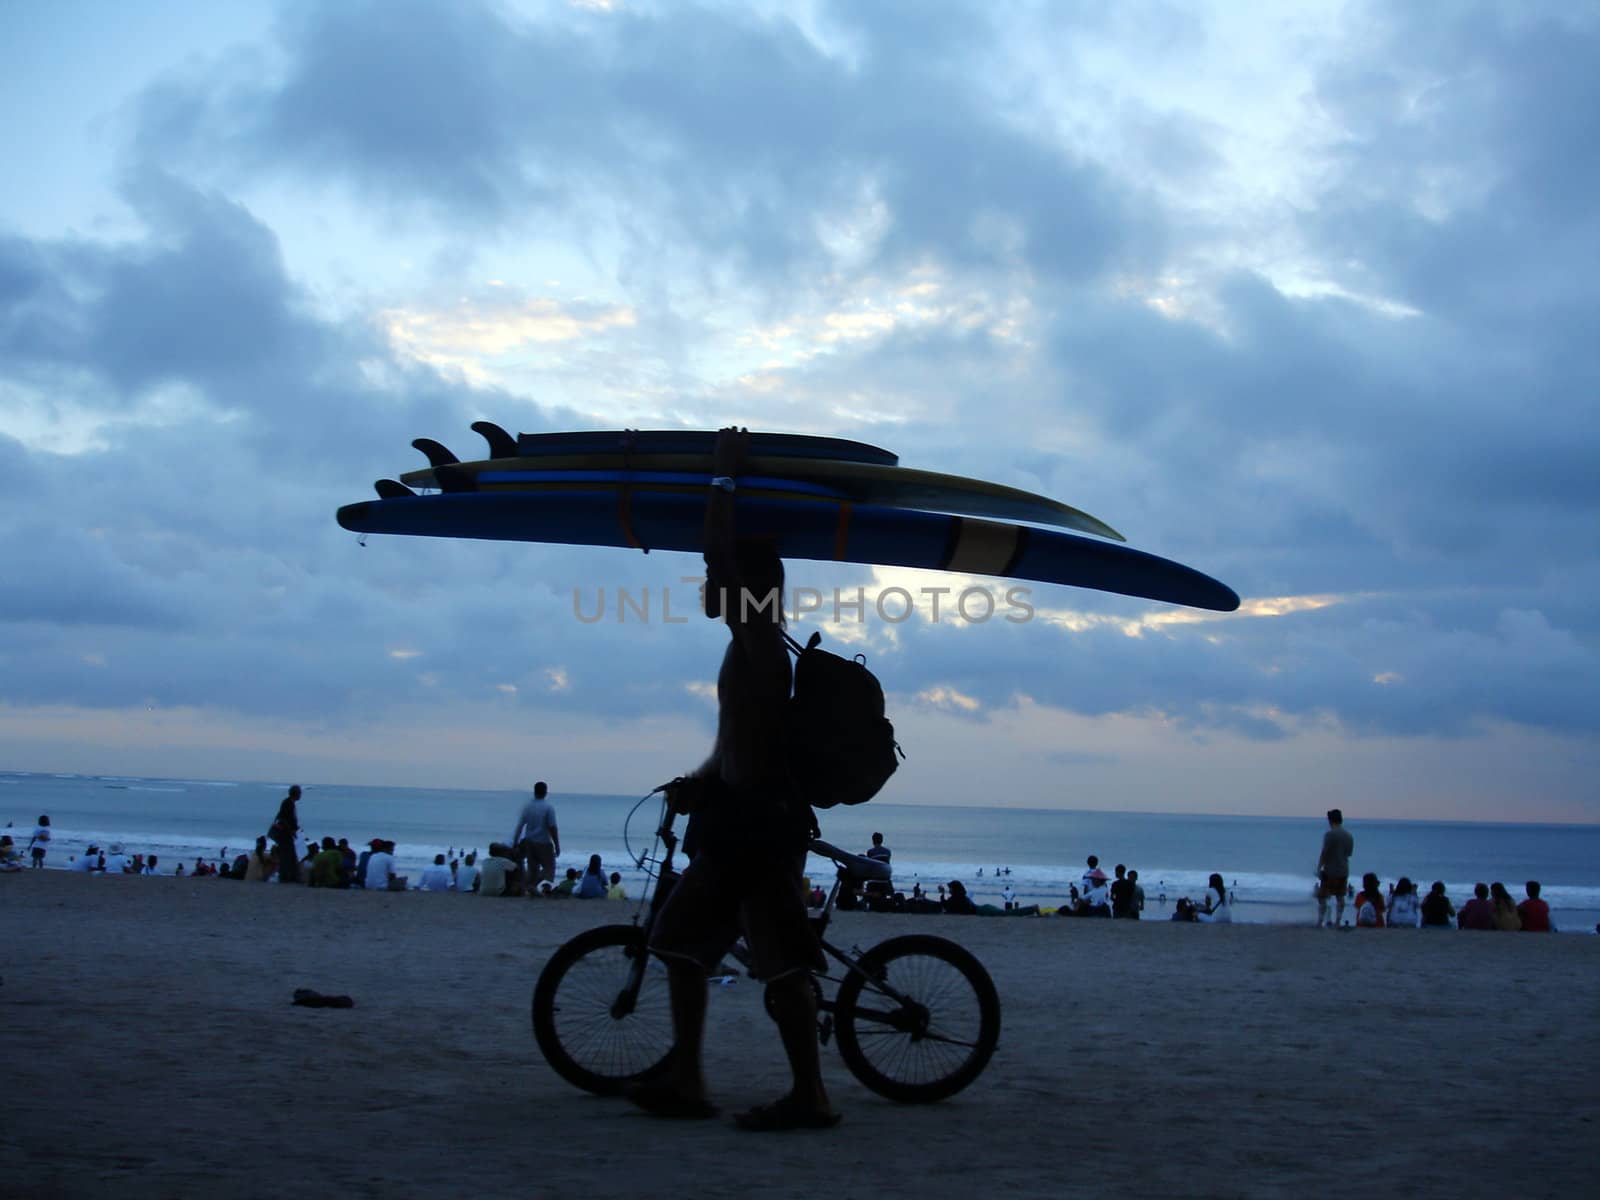 A man carrying surfboards on the beach at dusk, Kuta, Bali, Indonesia.